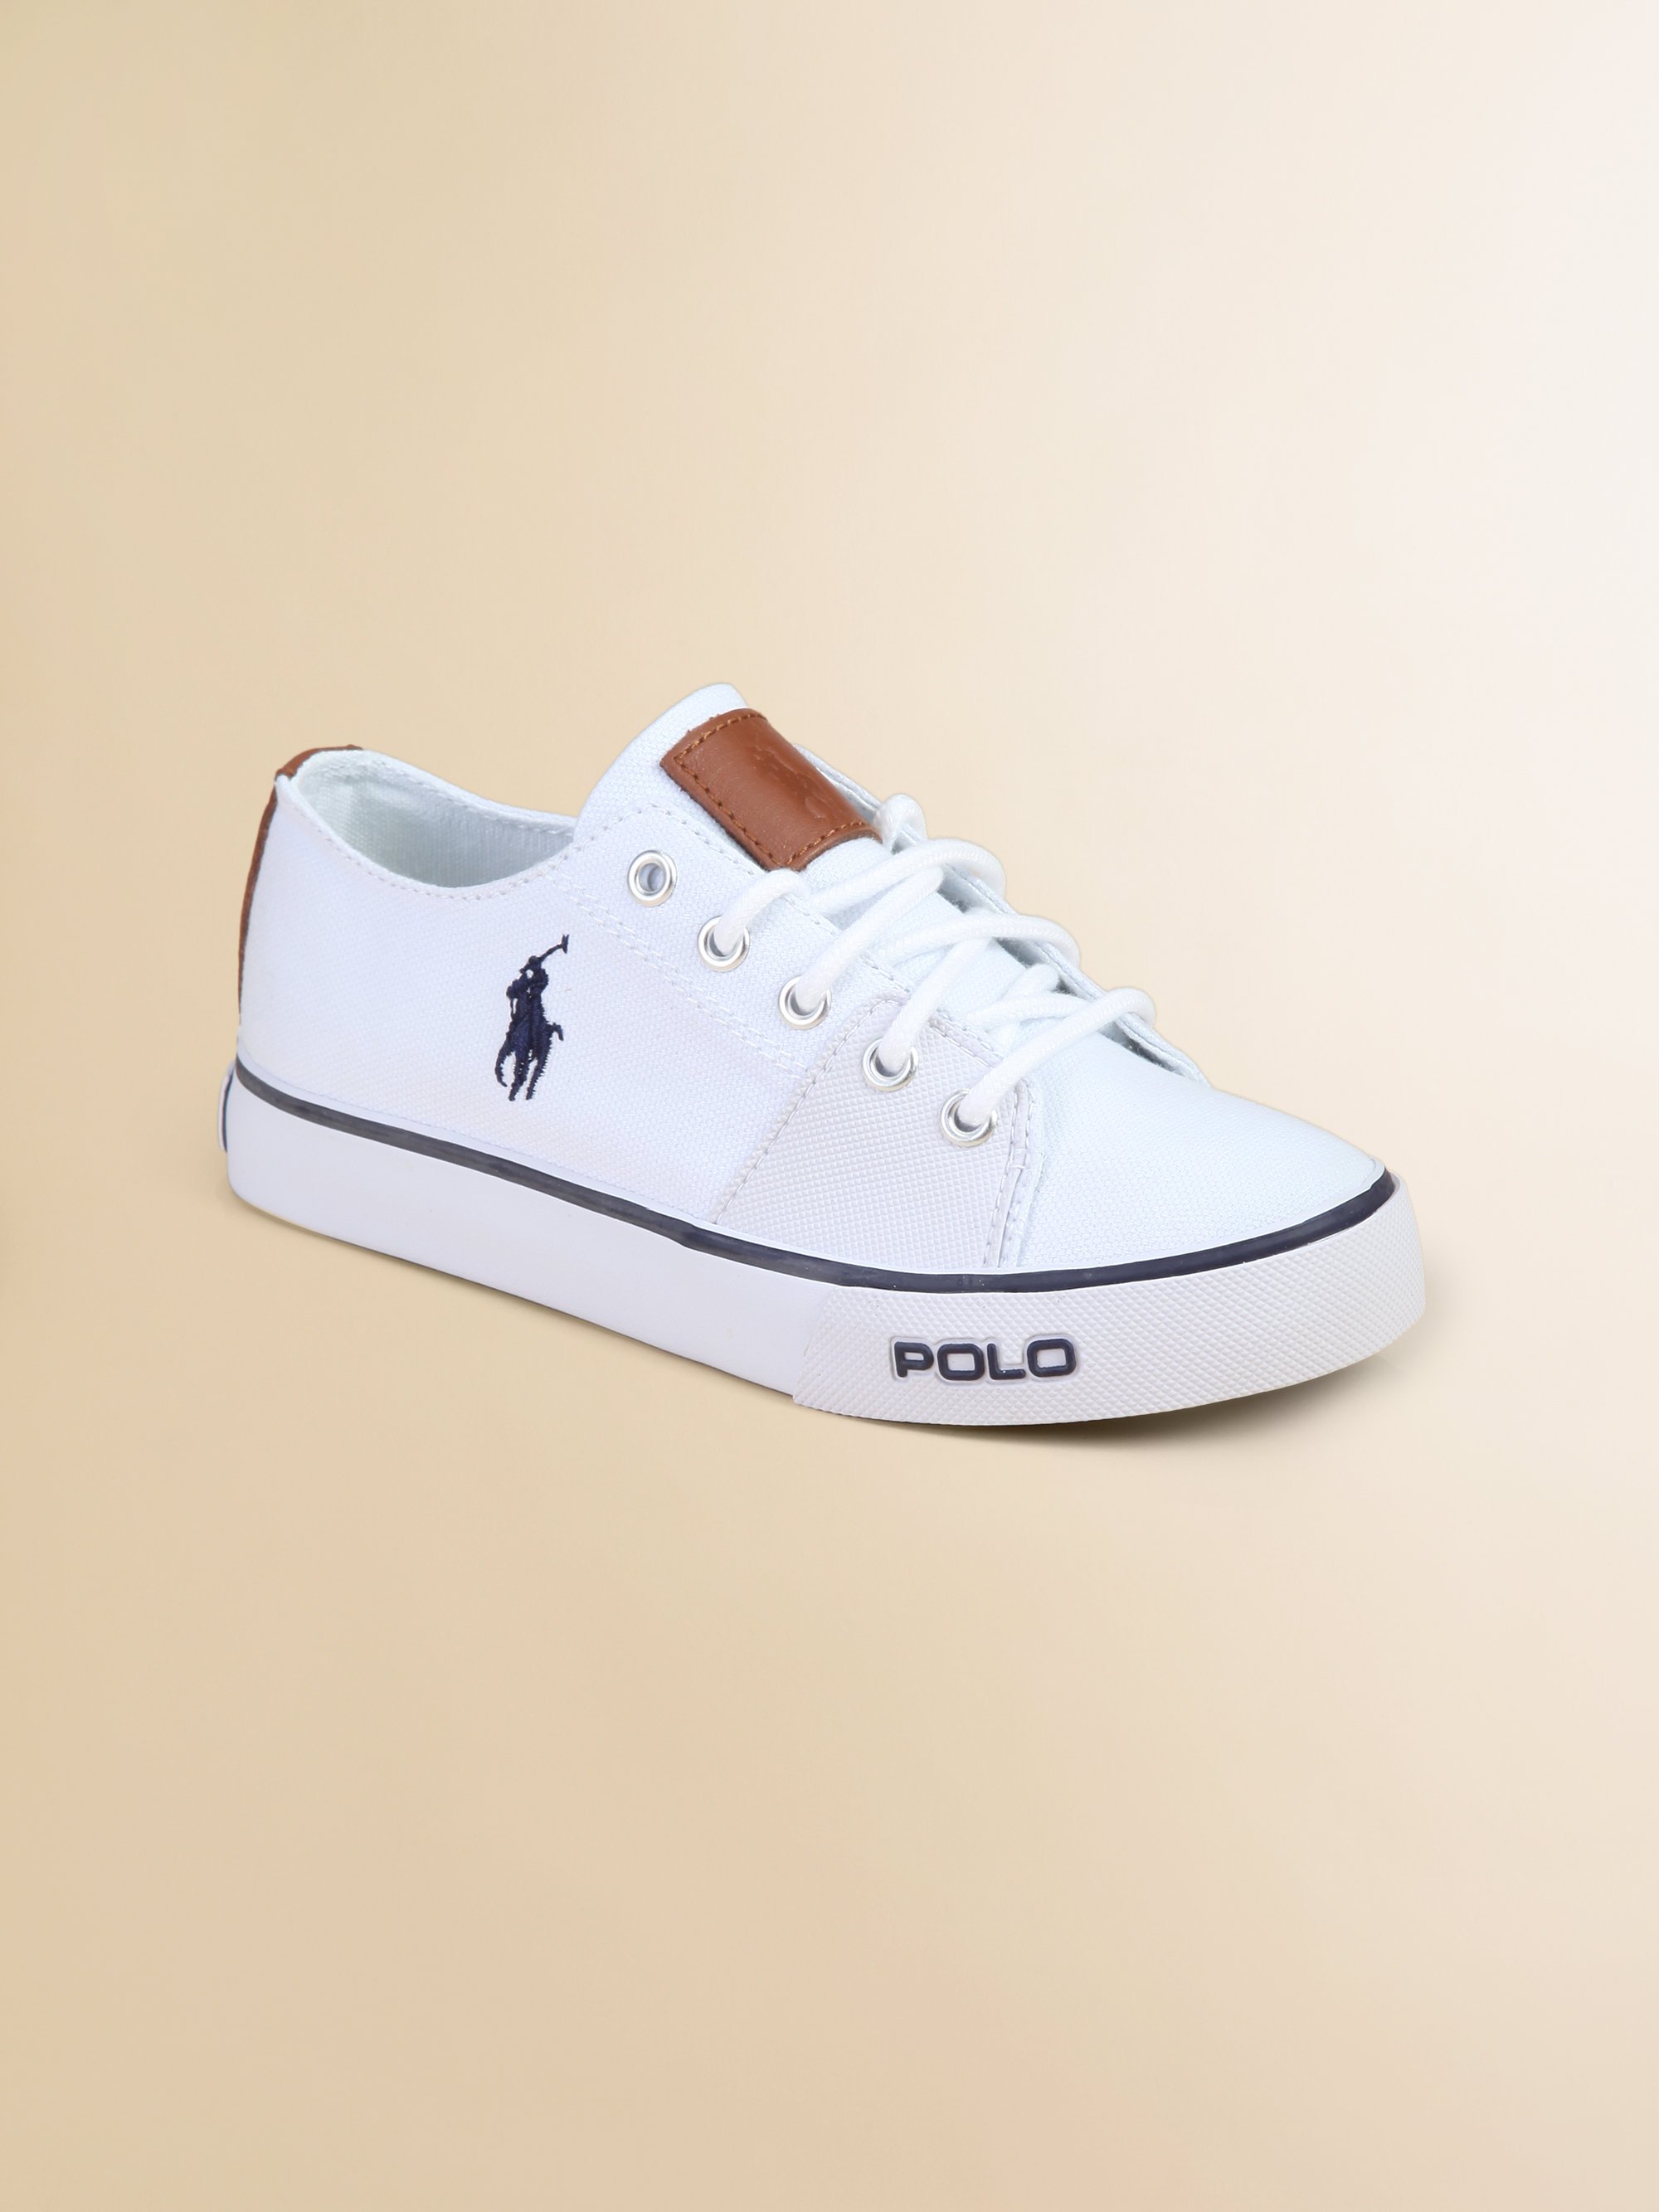 Ralph Lauren Kids Cantor Laceup Canvas Sneakers in White | Lyst